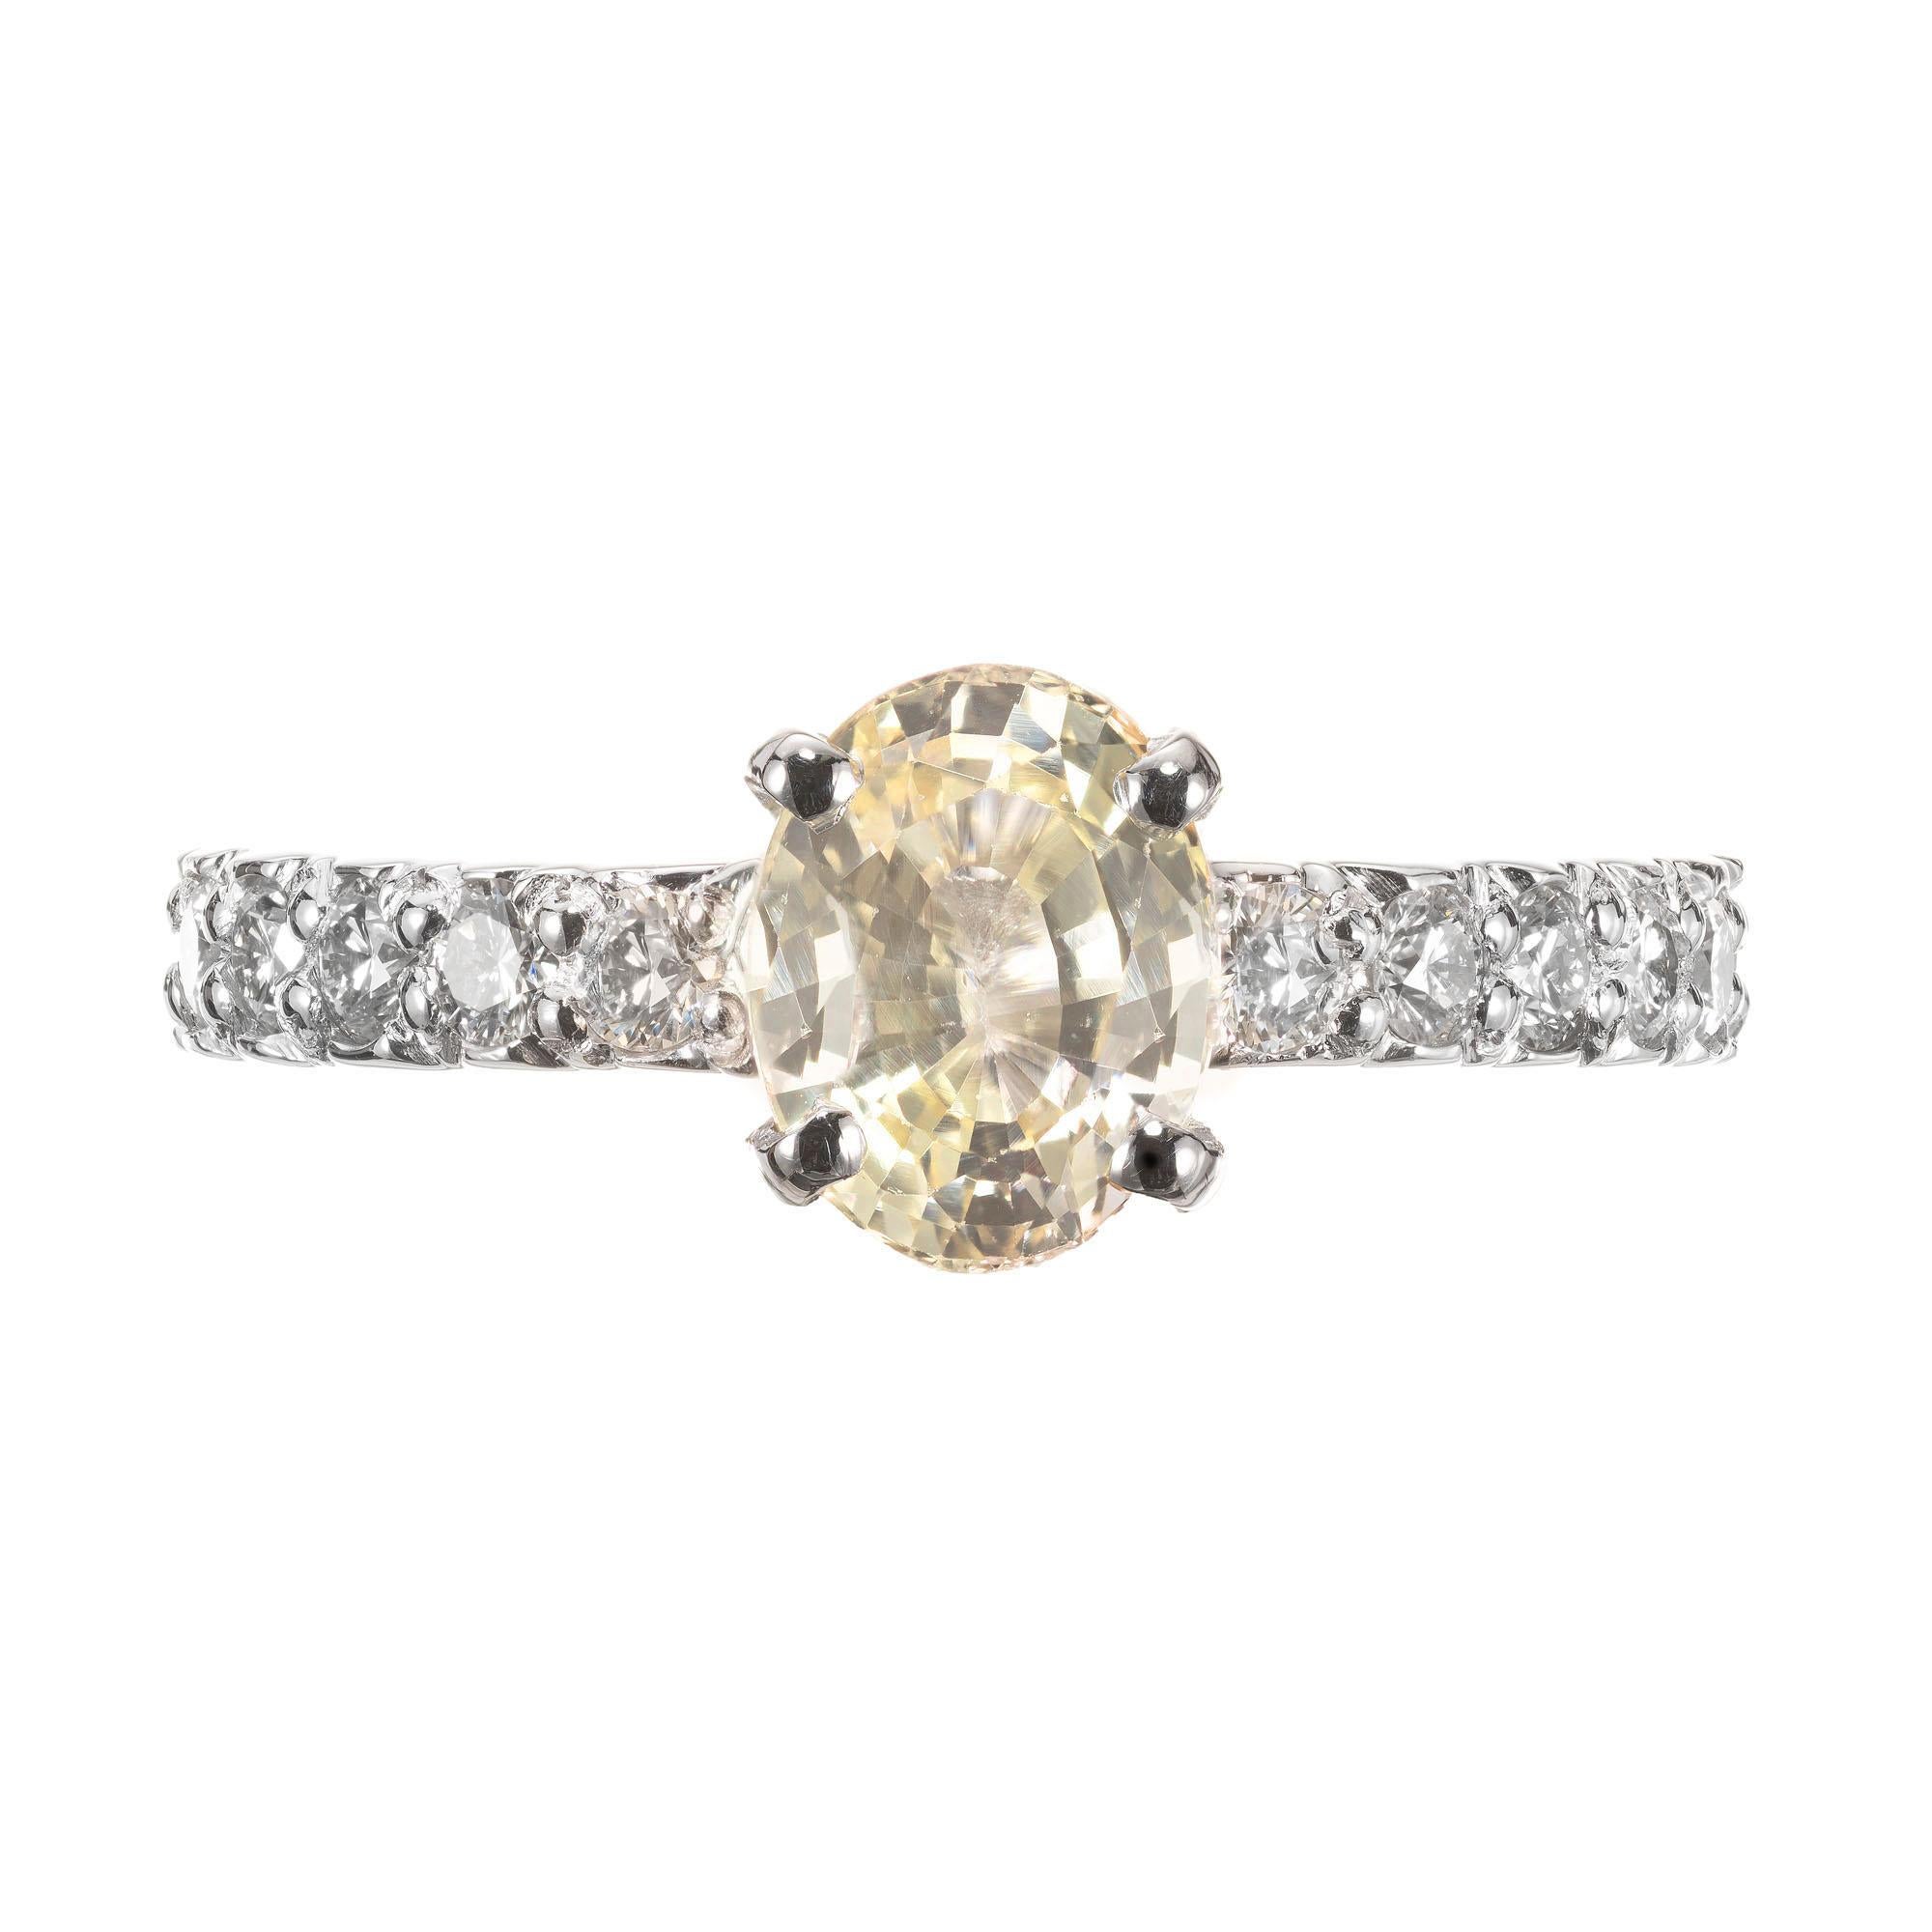 Natural no heat golden yellow sapphire and diamond engagement ring. GIA certified center stone in a platinum solitaire setting, with 14 bead set accent diamonds along the shank.

1 GIA certified oval natural no heat and no enhancements Sapphire